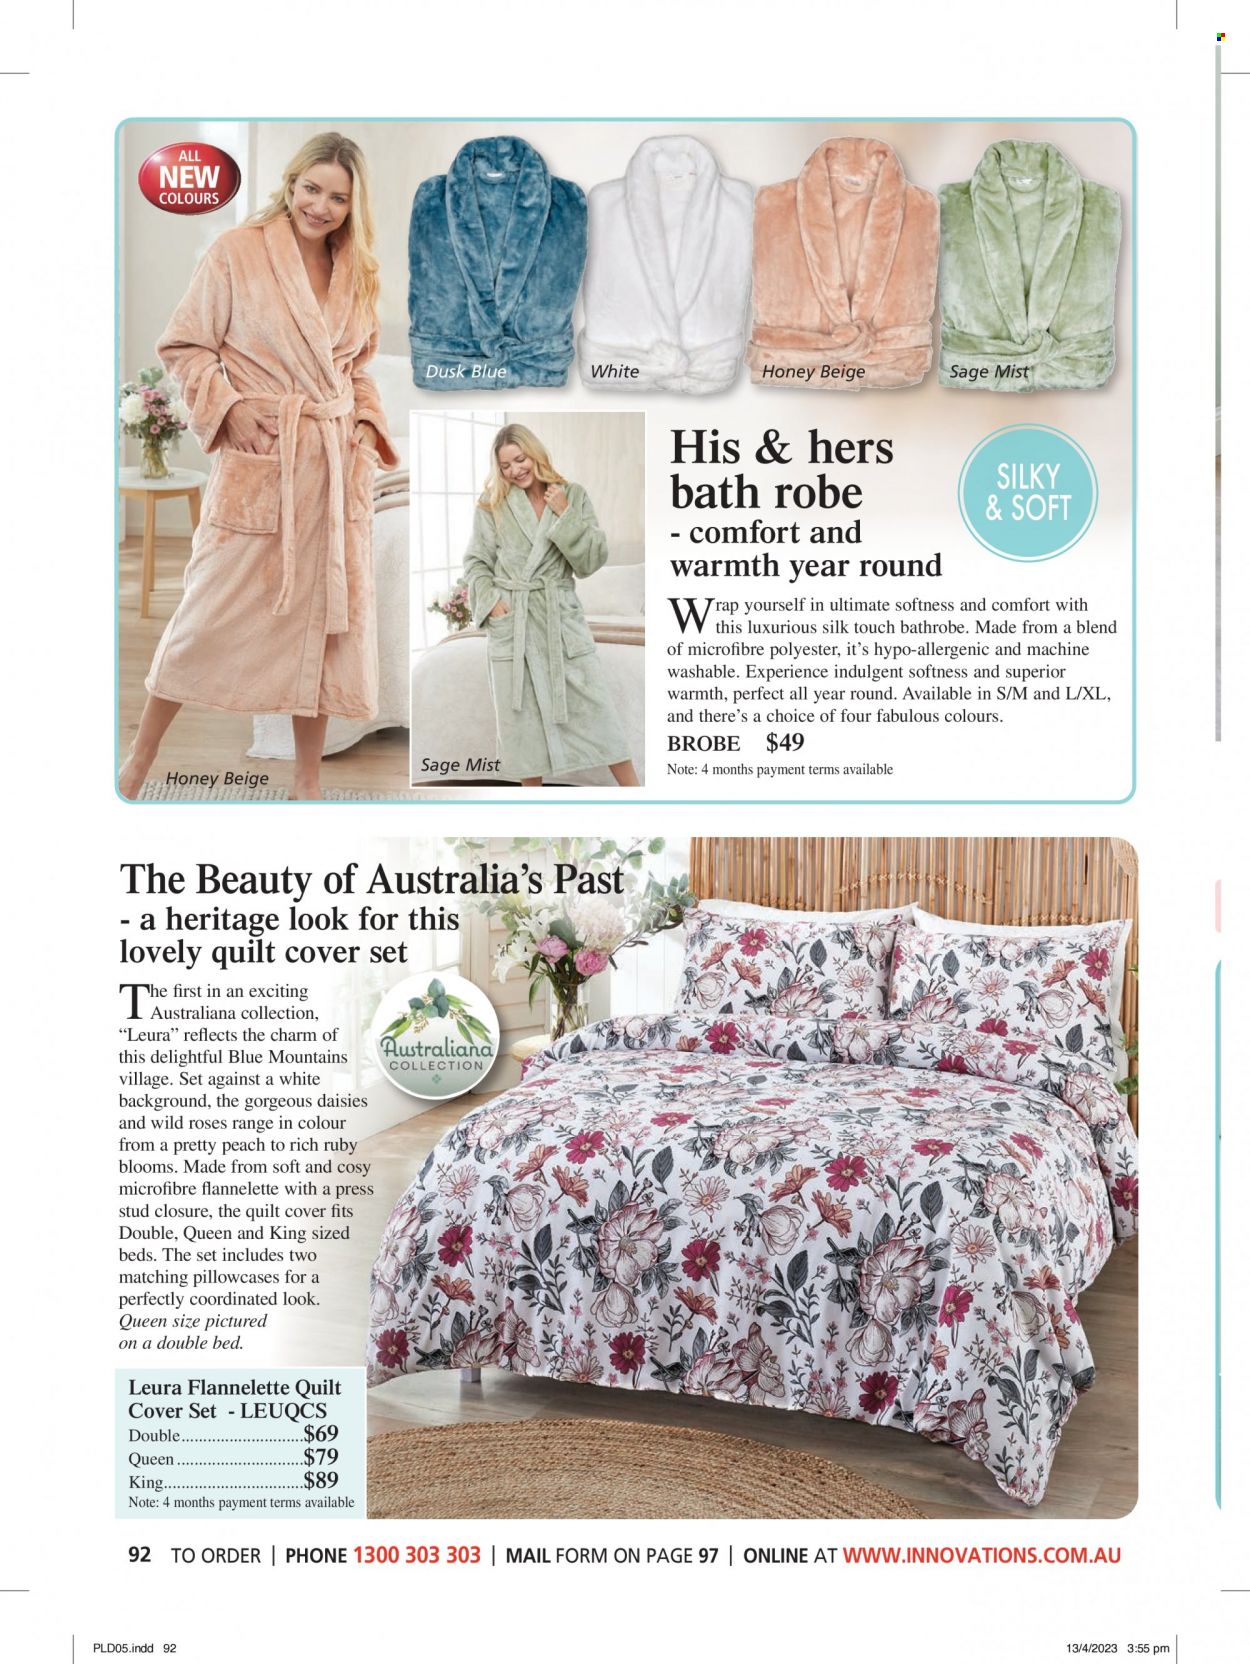 thumbnail - Innovations Catalogue - Sales products - pillowcase, quilt, quilt cover set, costume, robe, bathrobe. Page 92.